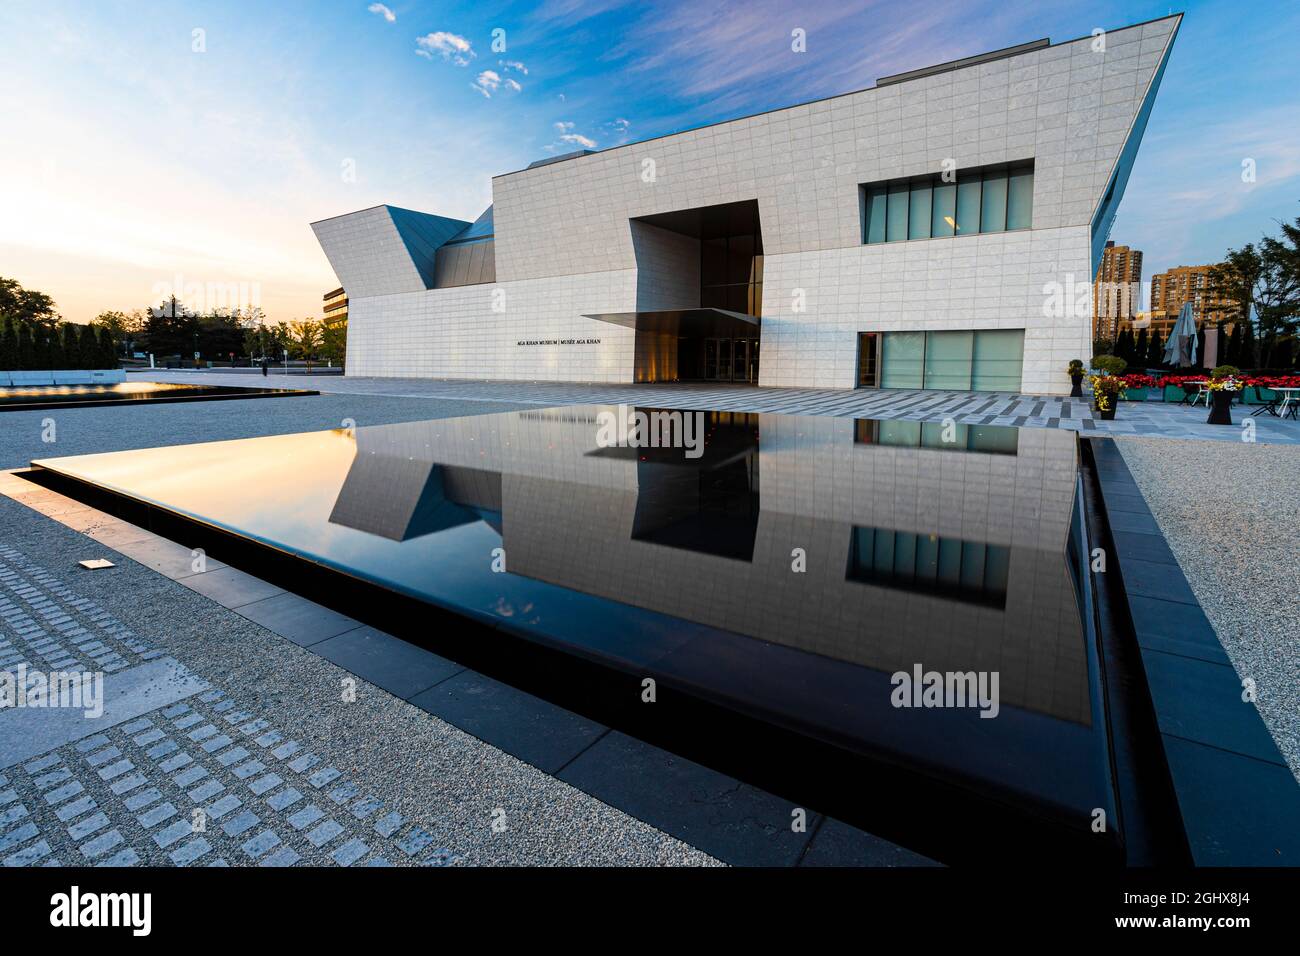 The Aga Khan Museum in Toronto, Ontario, Canada, shares its beautiful landscaped park with the nearby Ismaili Centre. Stock Photo